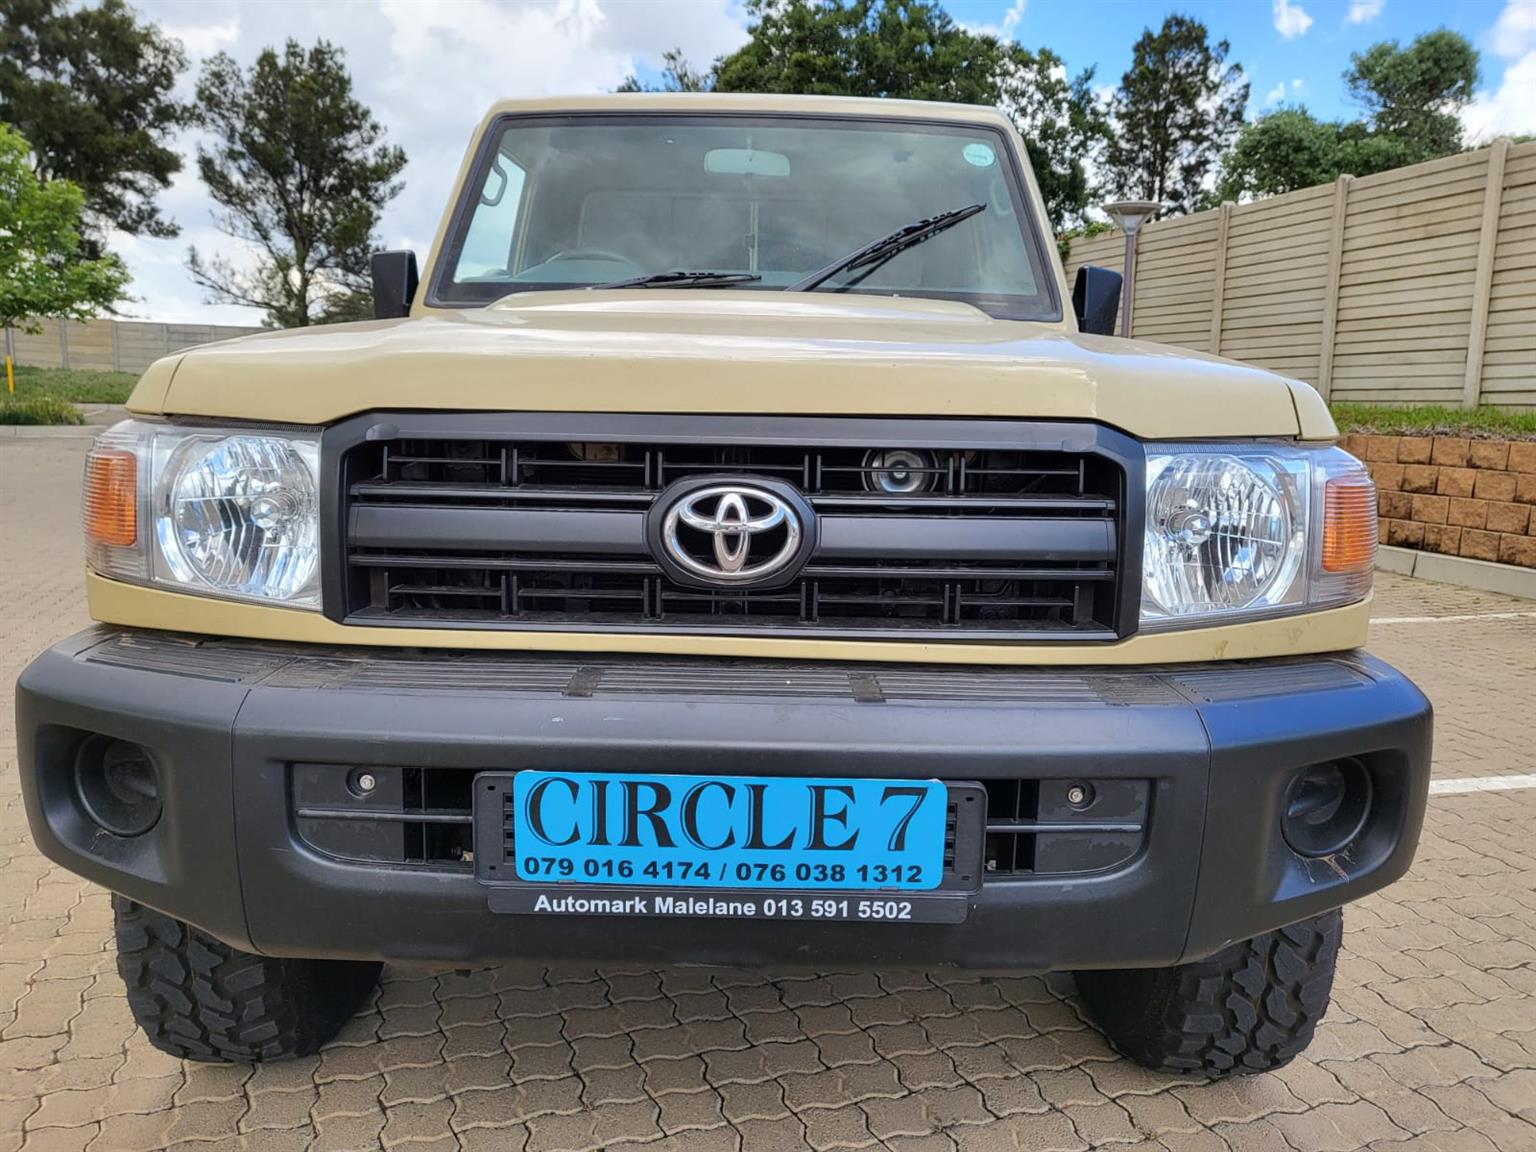 2011 Toyota Land Cruiser 79 4.2D Pick-Up S/C Good Condition Low Mileage 59,000km